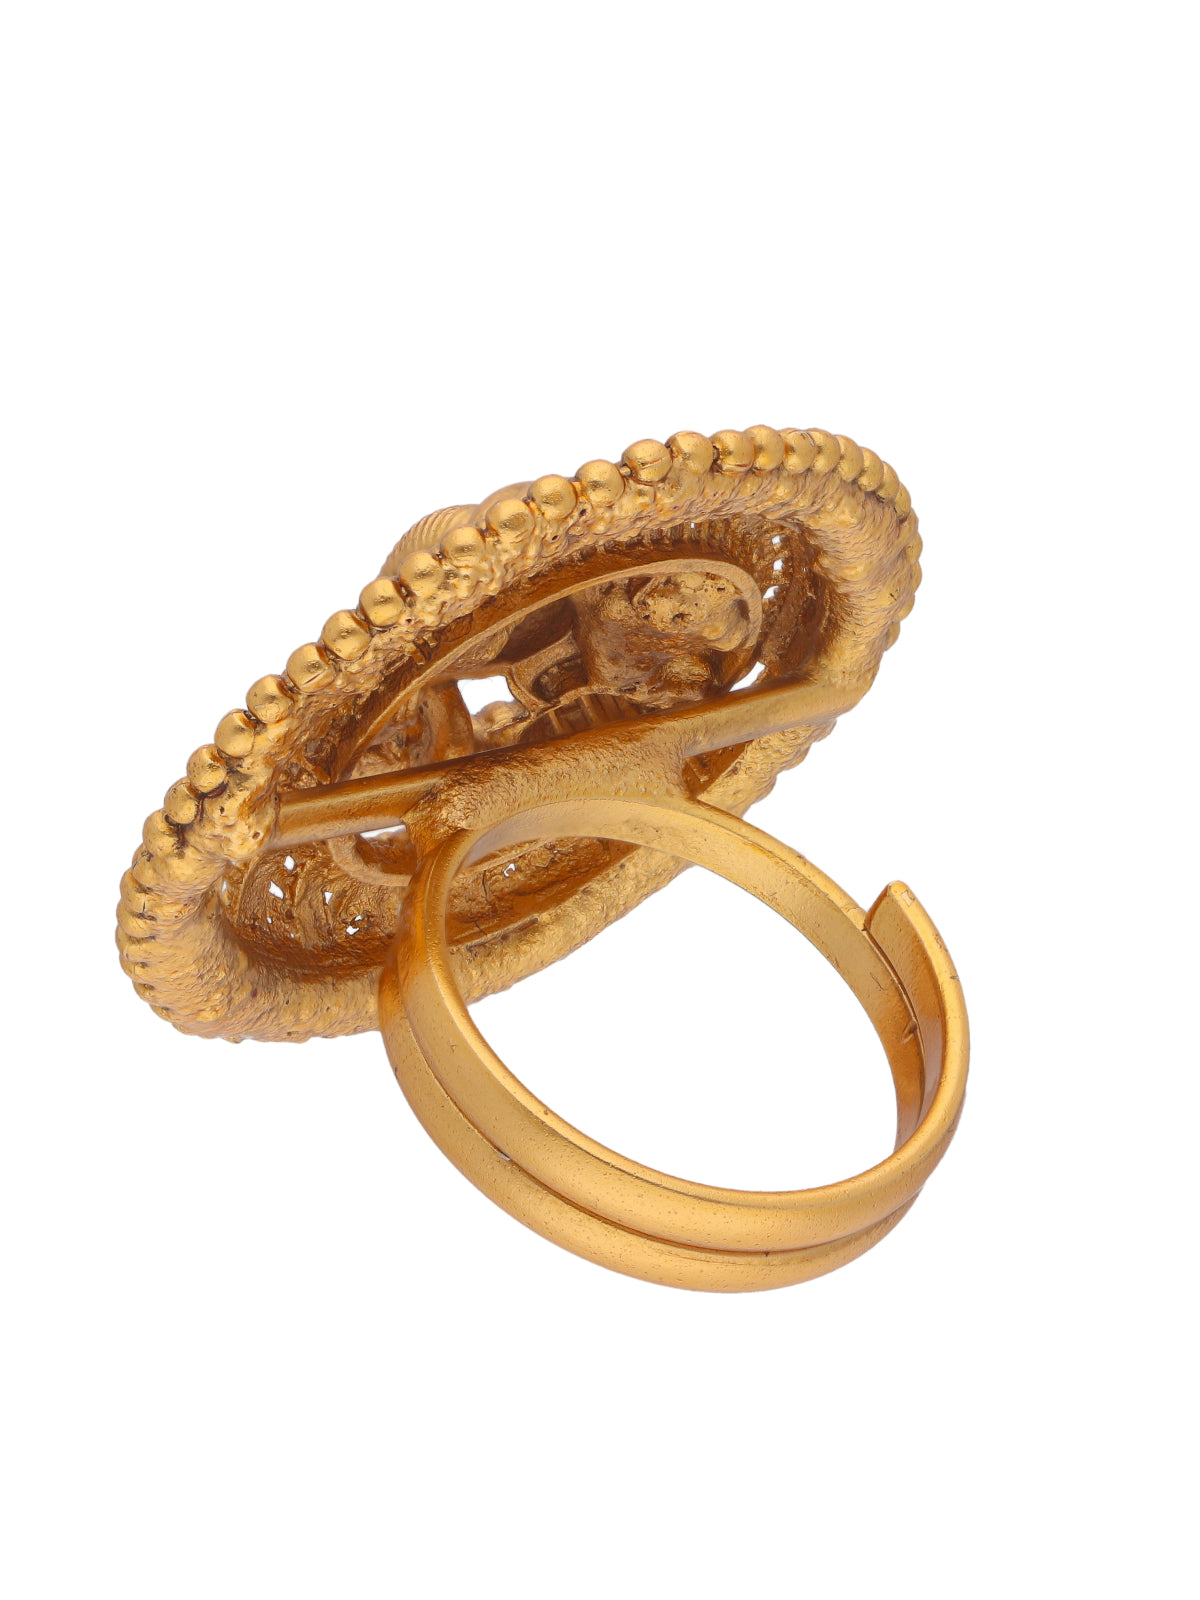 Premium Photo | A gold ring with a round flower design.